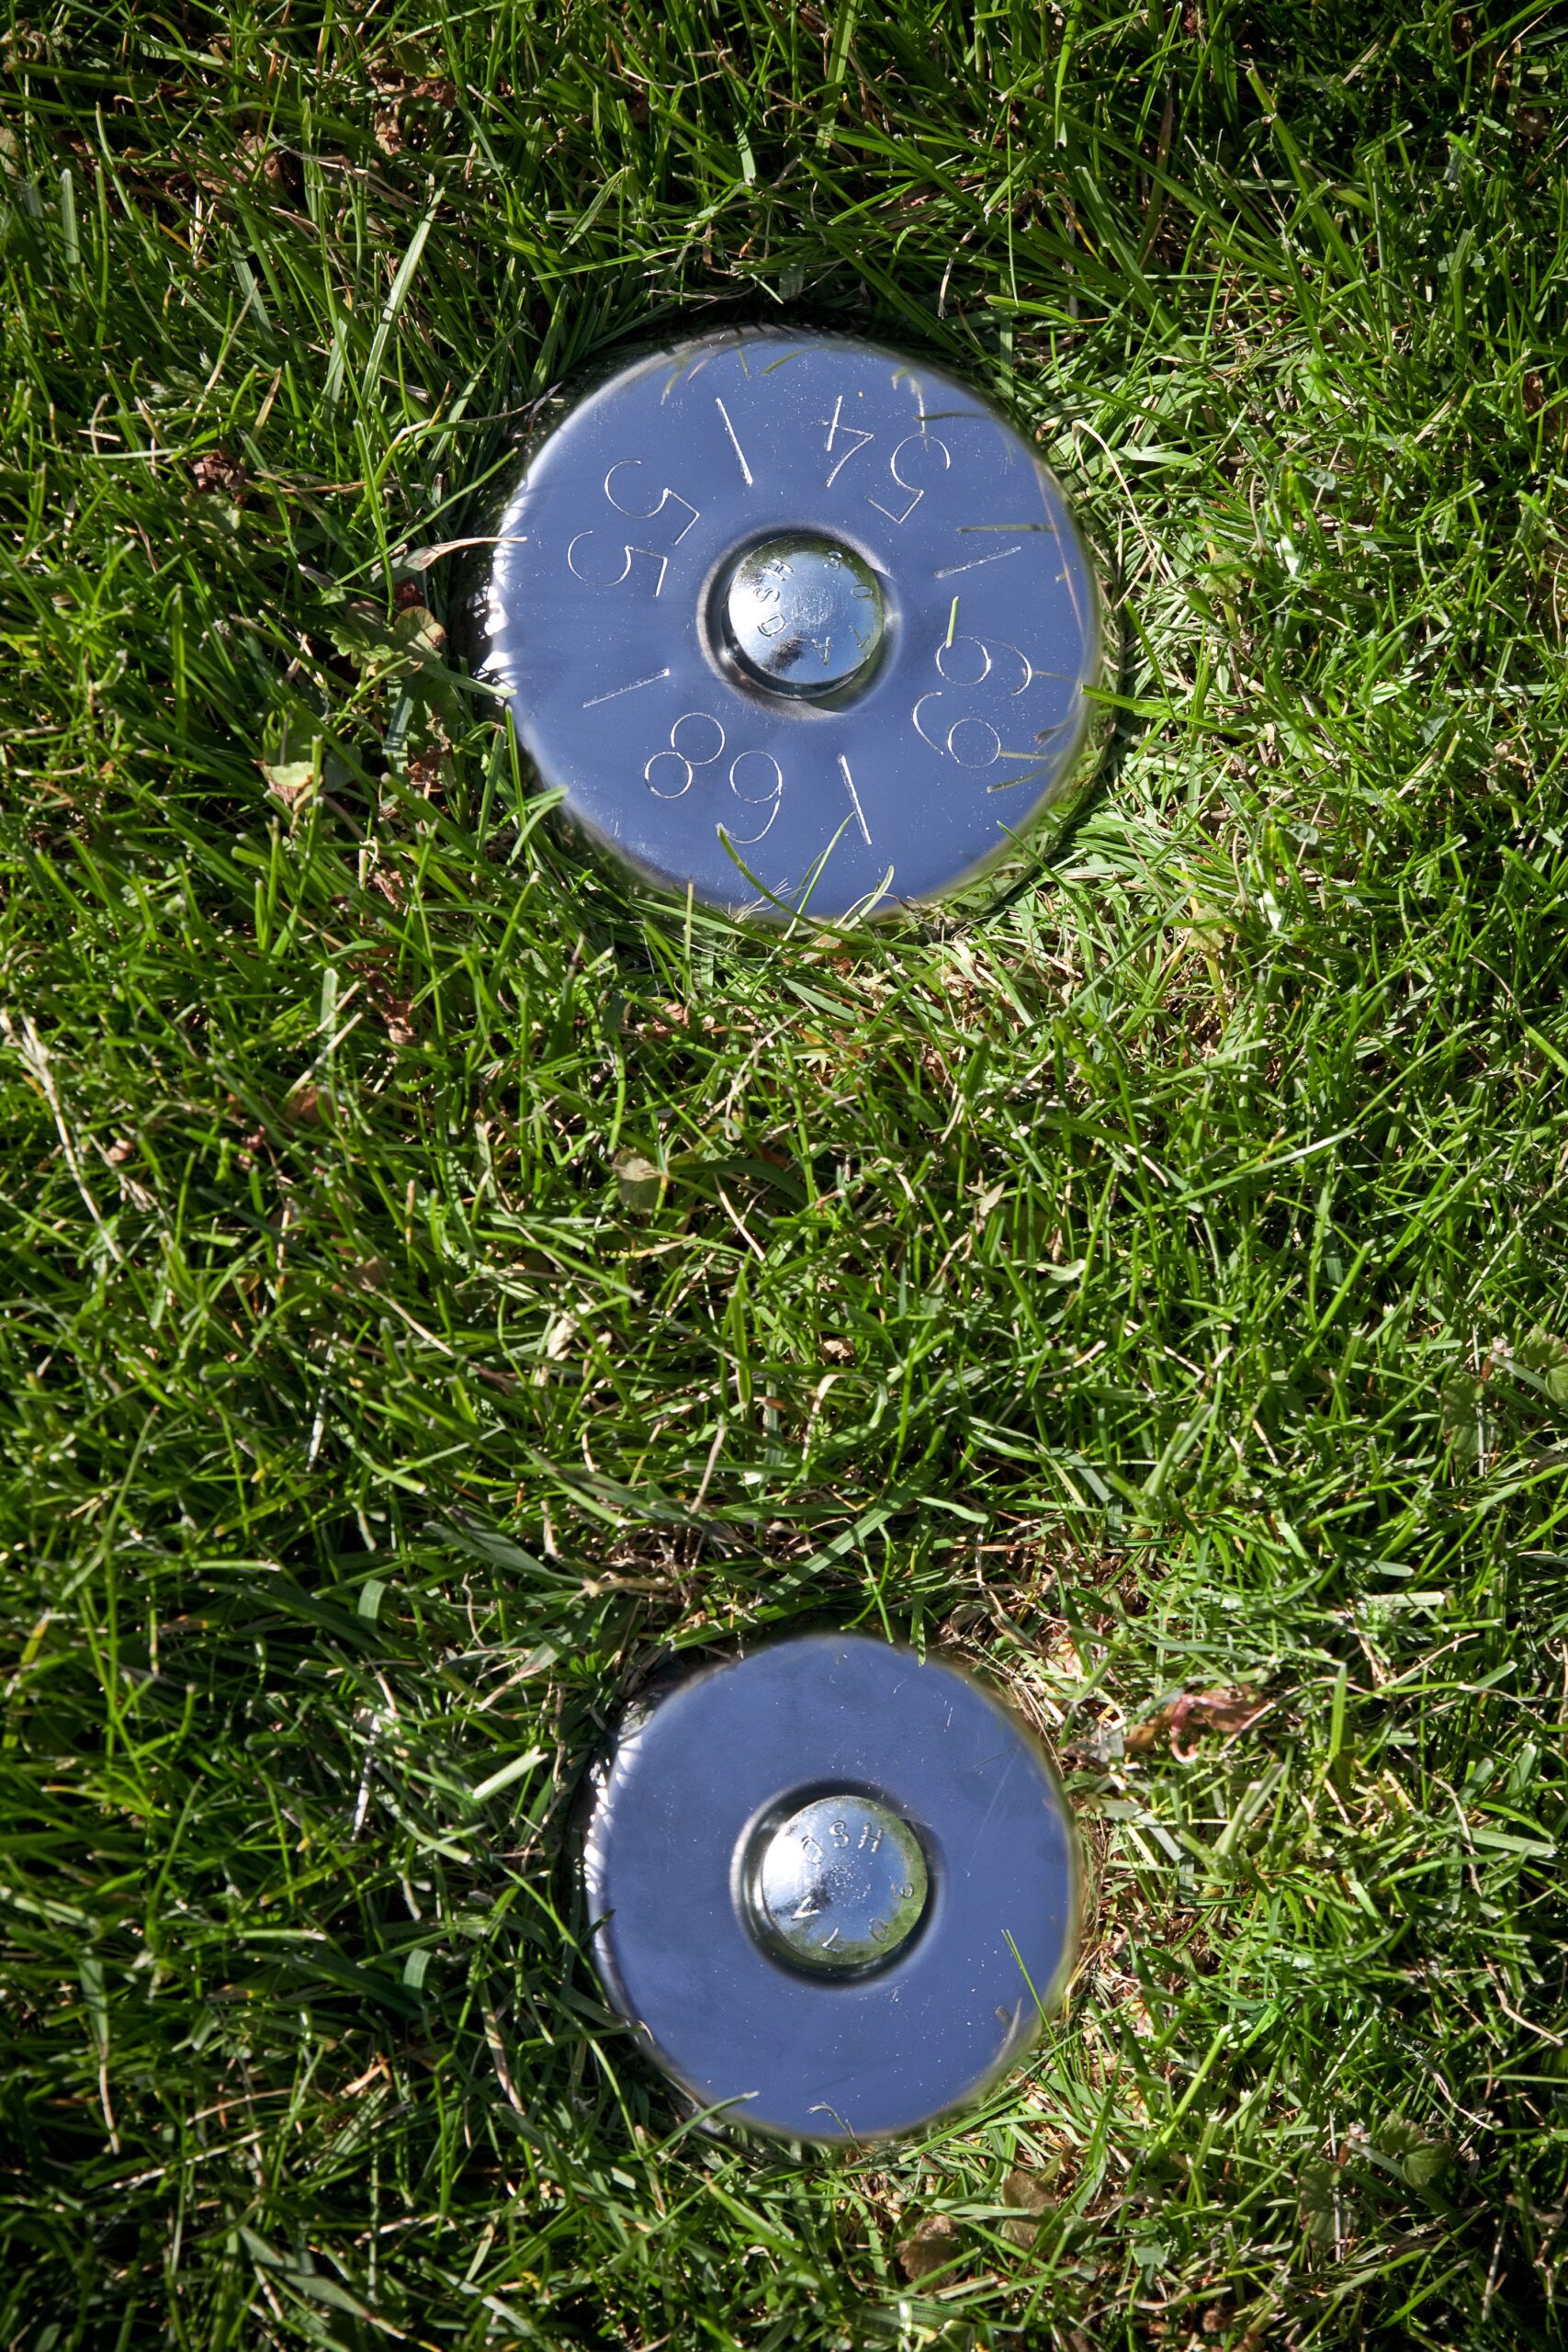 Two **Stainless Steel Lot Markers** embedded in grass, the top one displays numbers 54 and 59, while the bottom one has no apparent markings.